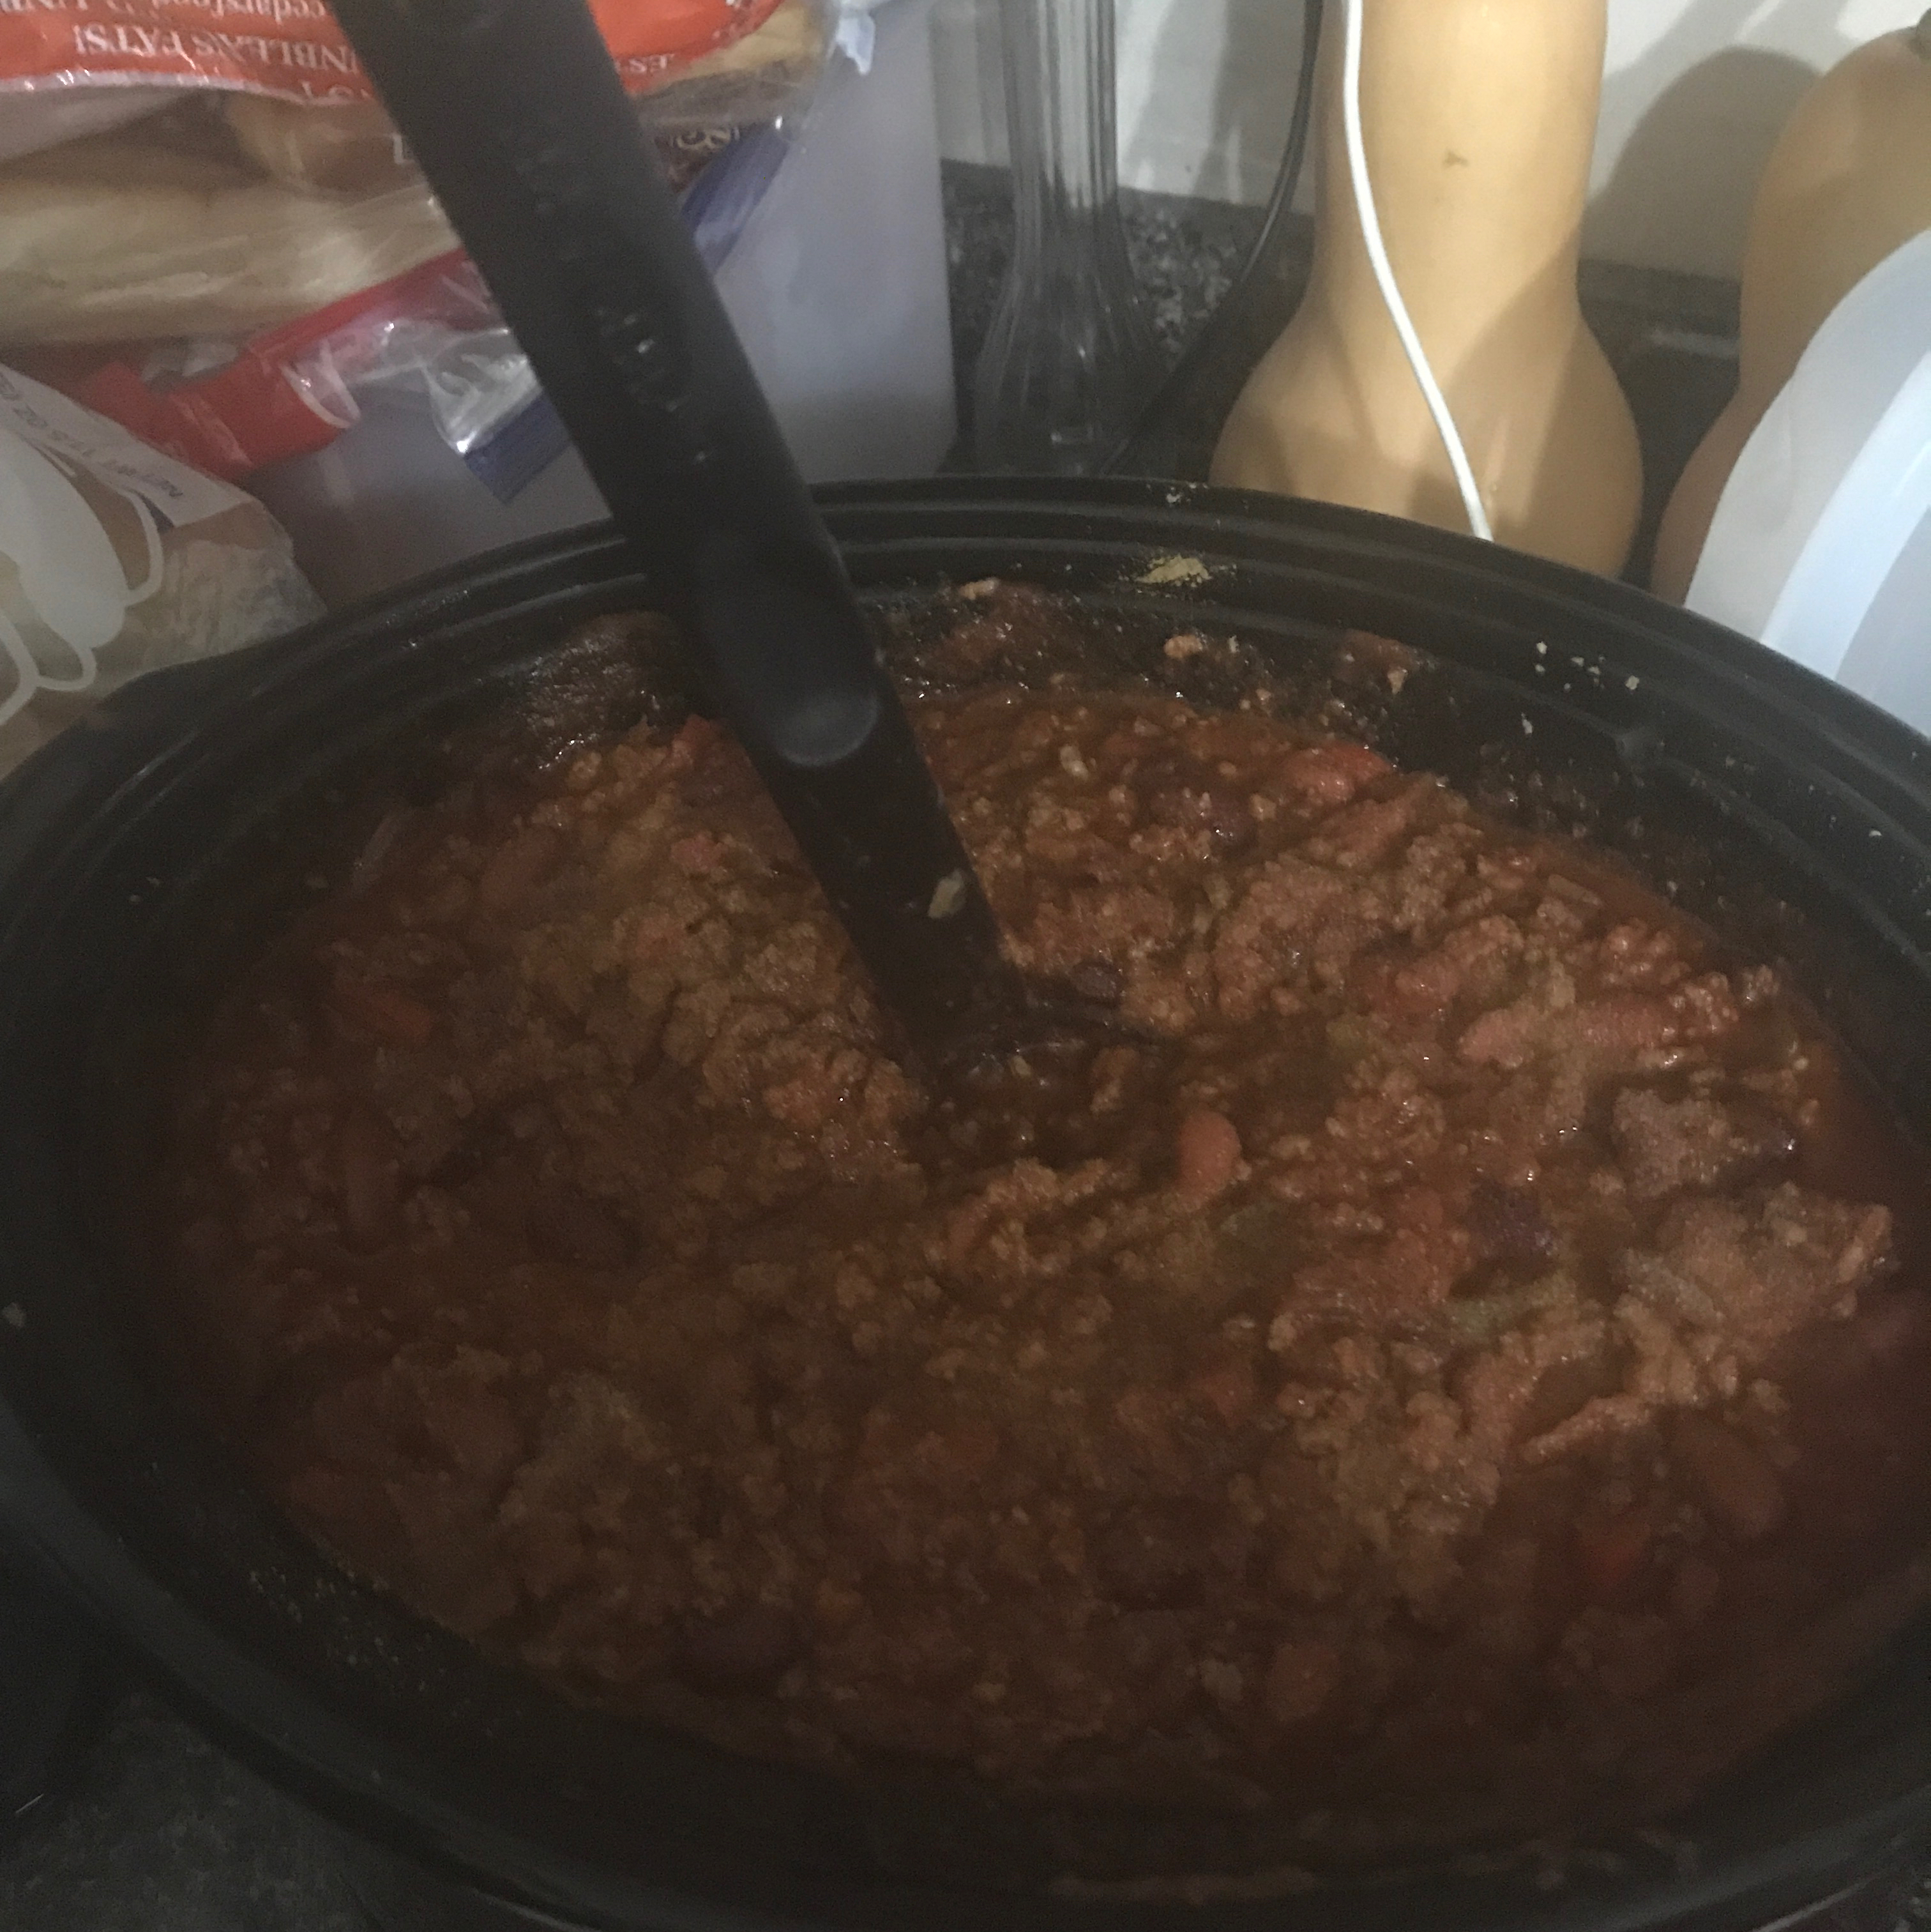 It's Chili by George!! 